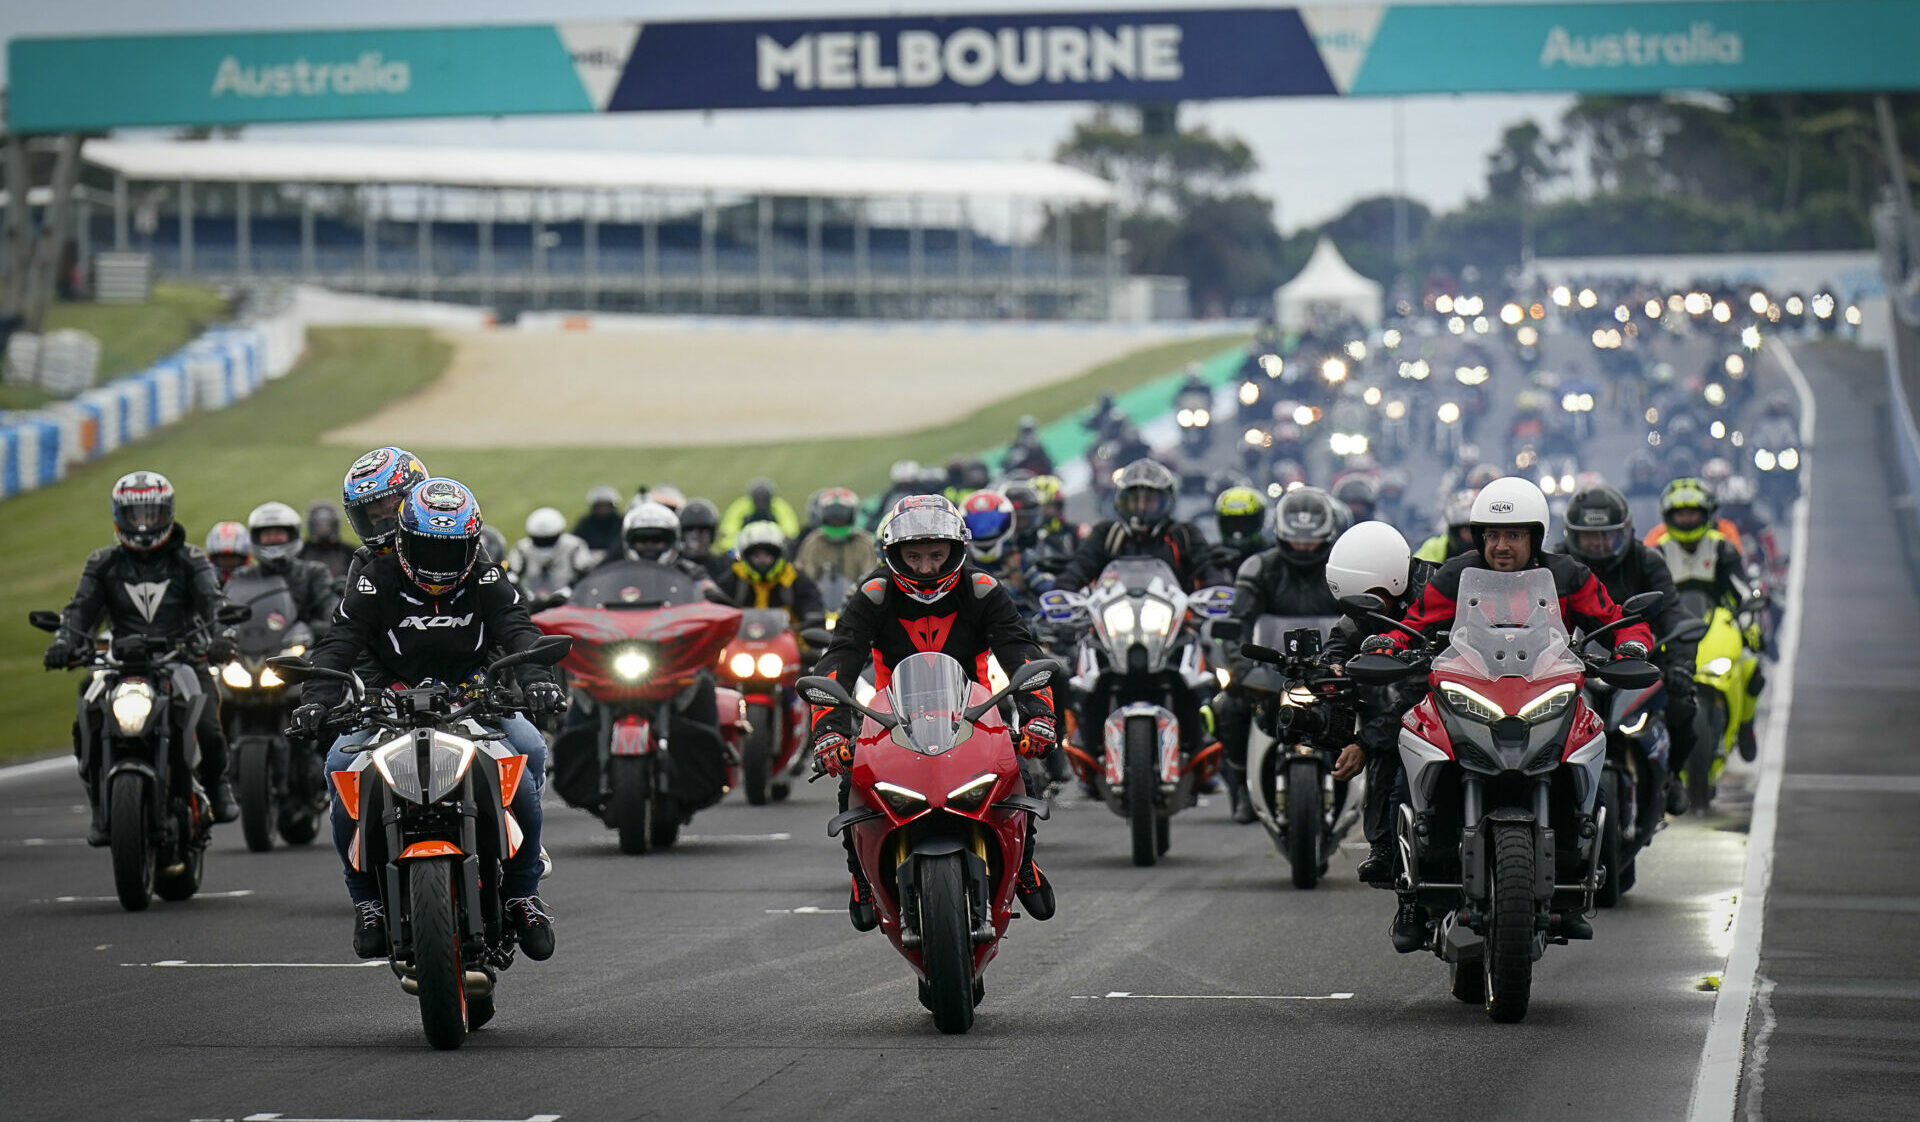 Remy Gardner (on orange KTM) and Jack Miller (on red Ducati) lead a parade of motorcyclists around the Phillip Island Grand Prix Circuit. Photo courtesy Dorna.